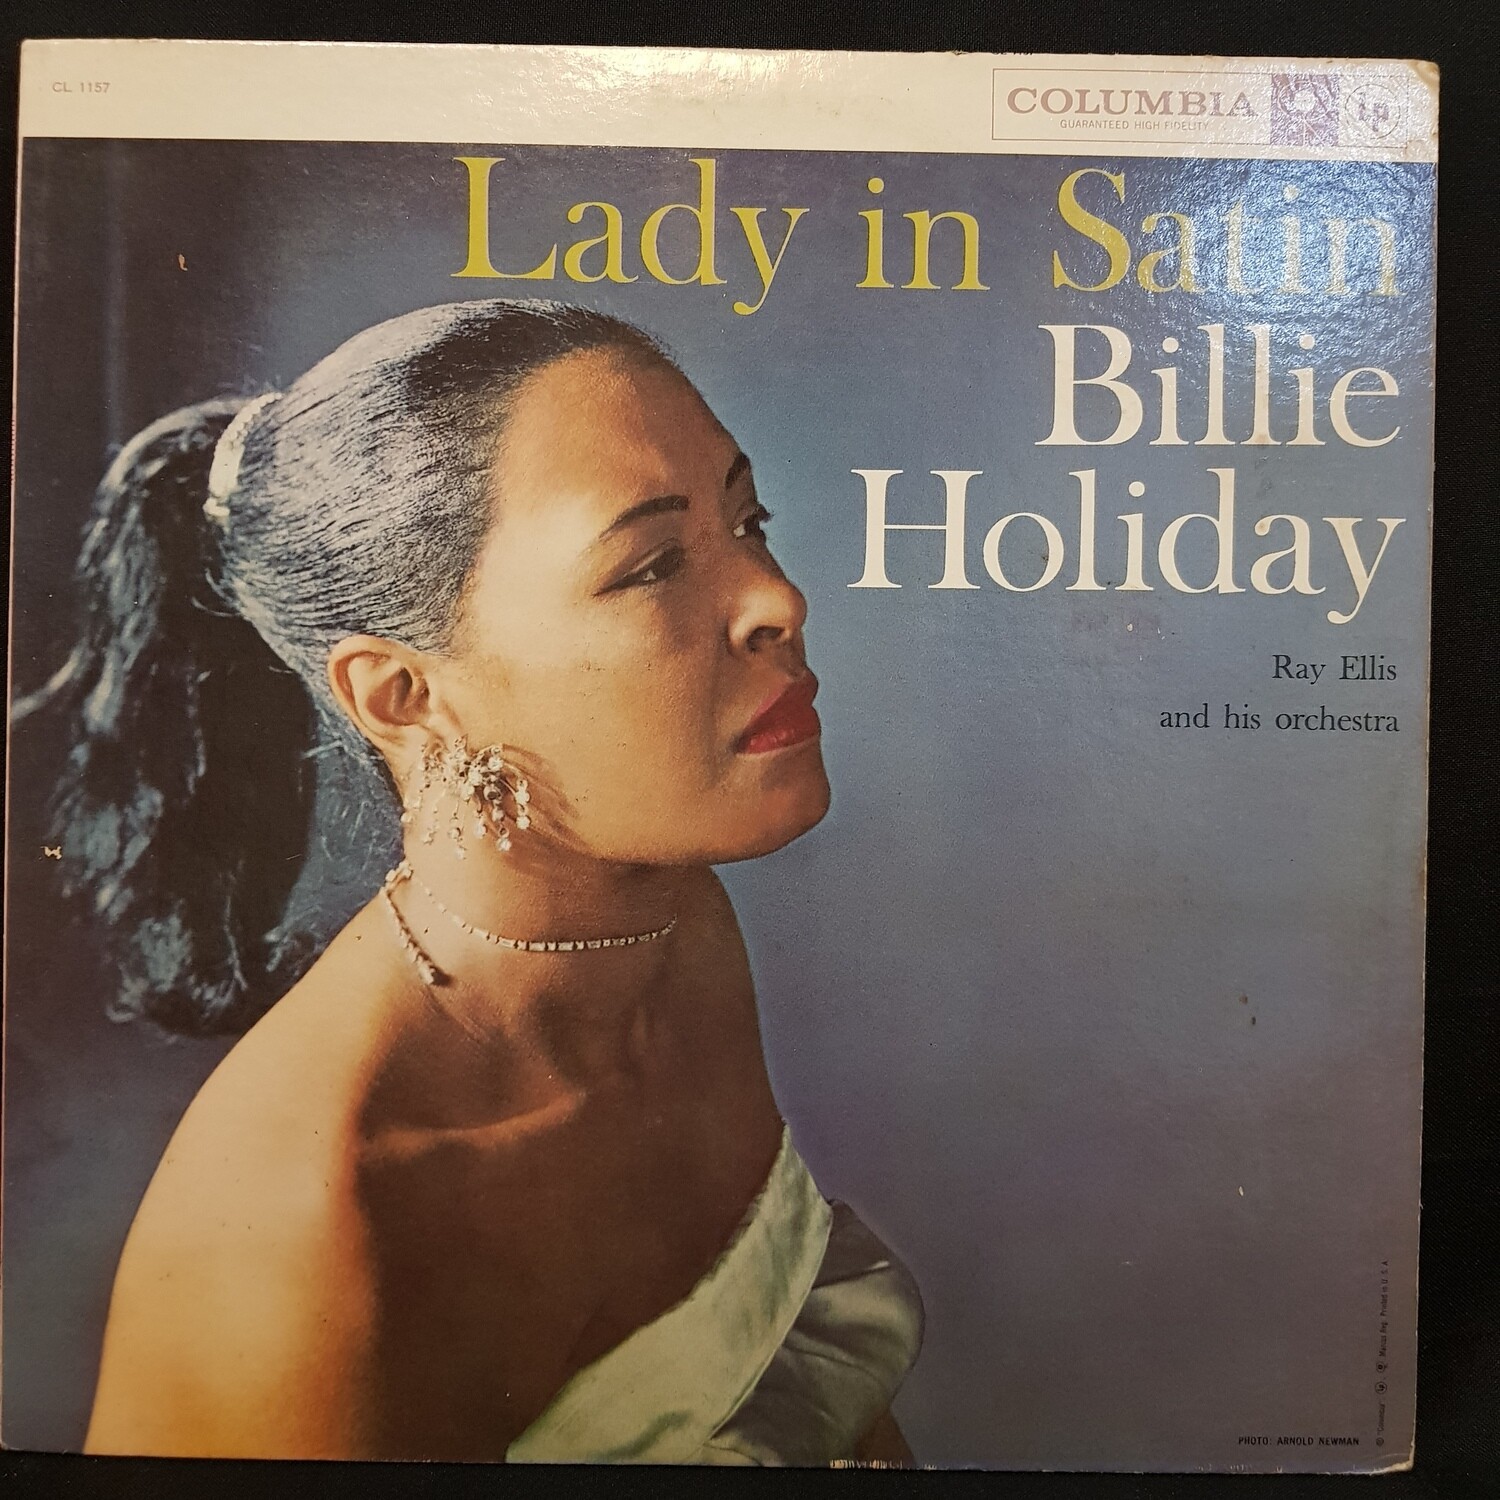 Billie Holiday- Lady In Satin